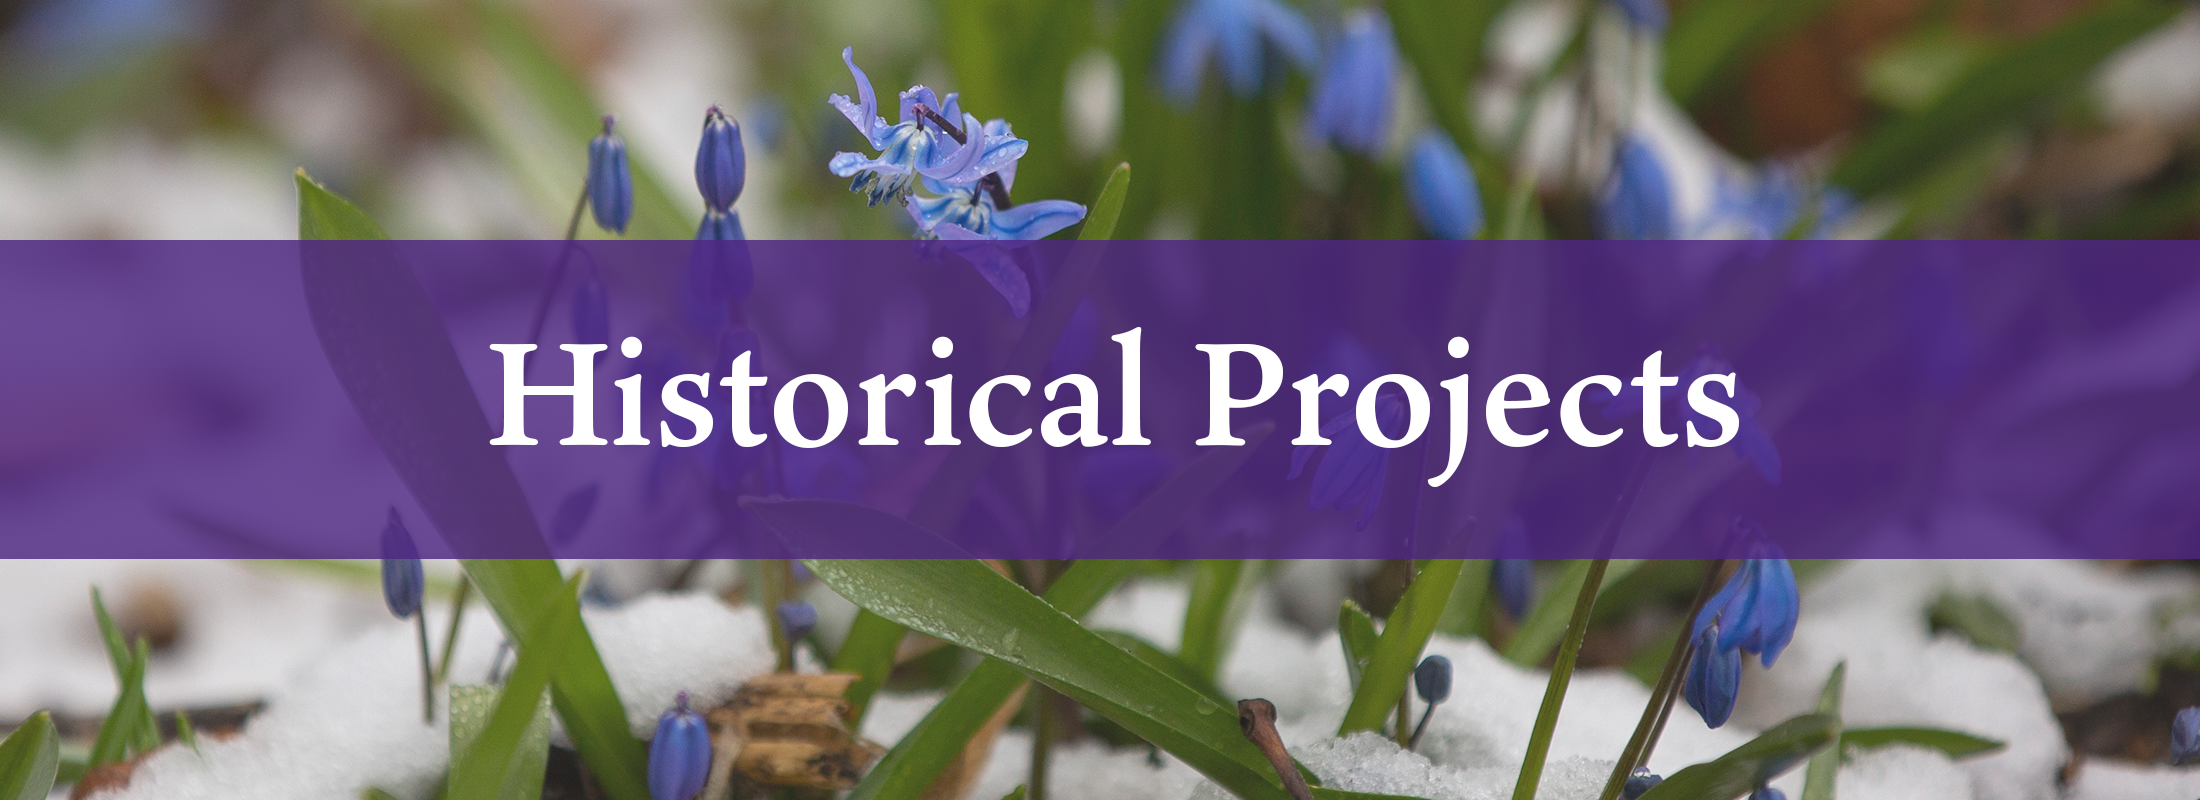 Historical Projects